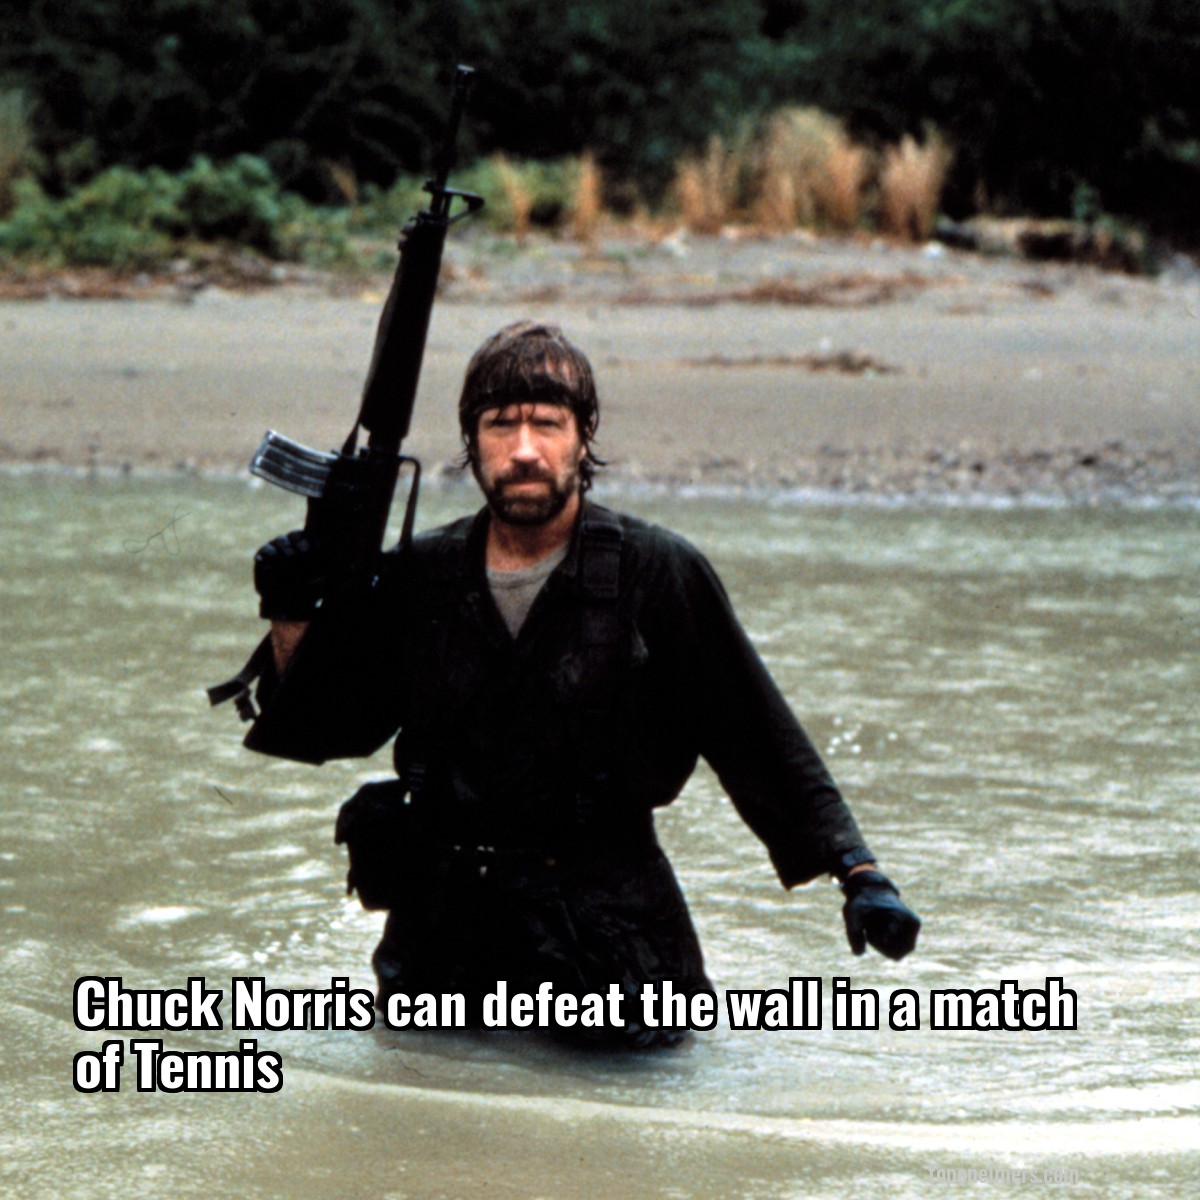 Chuck Norris can defeat the wall in a match of Tennis